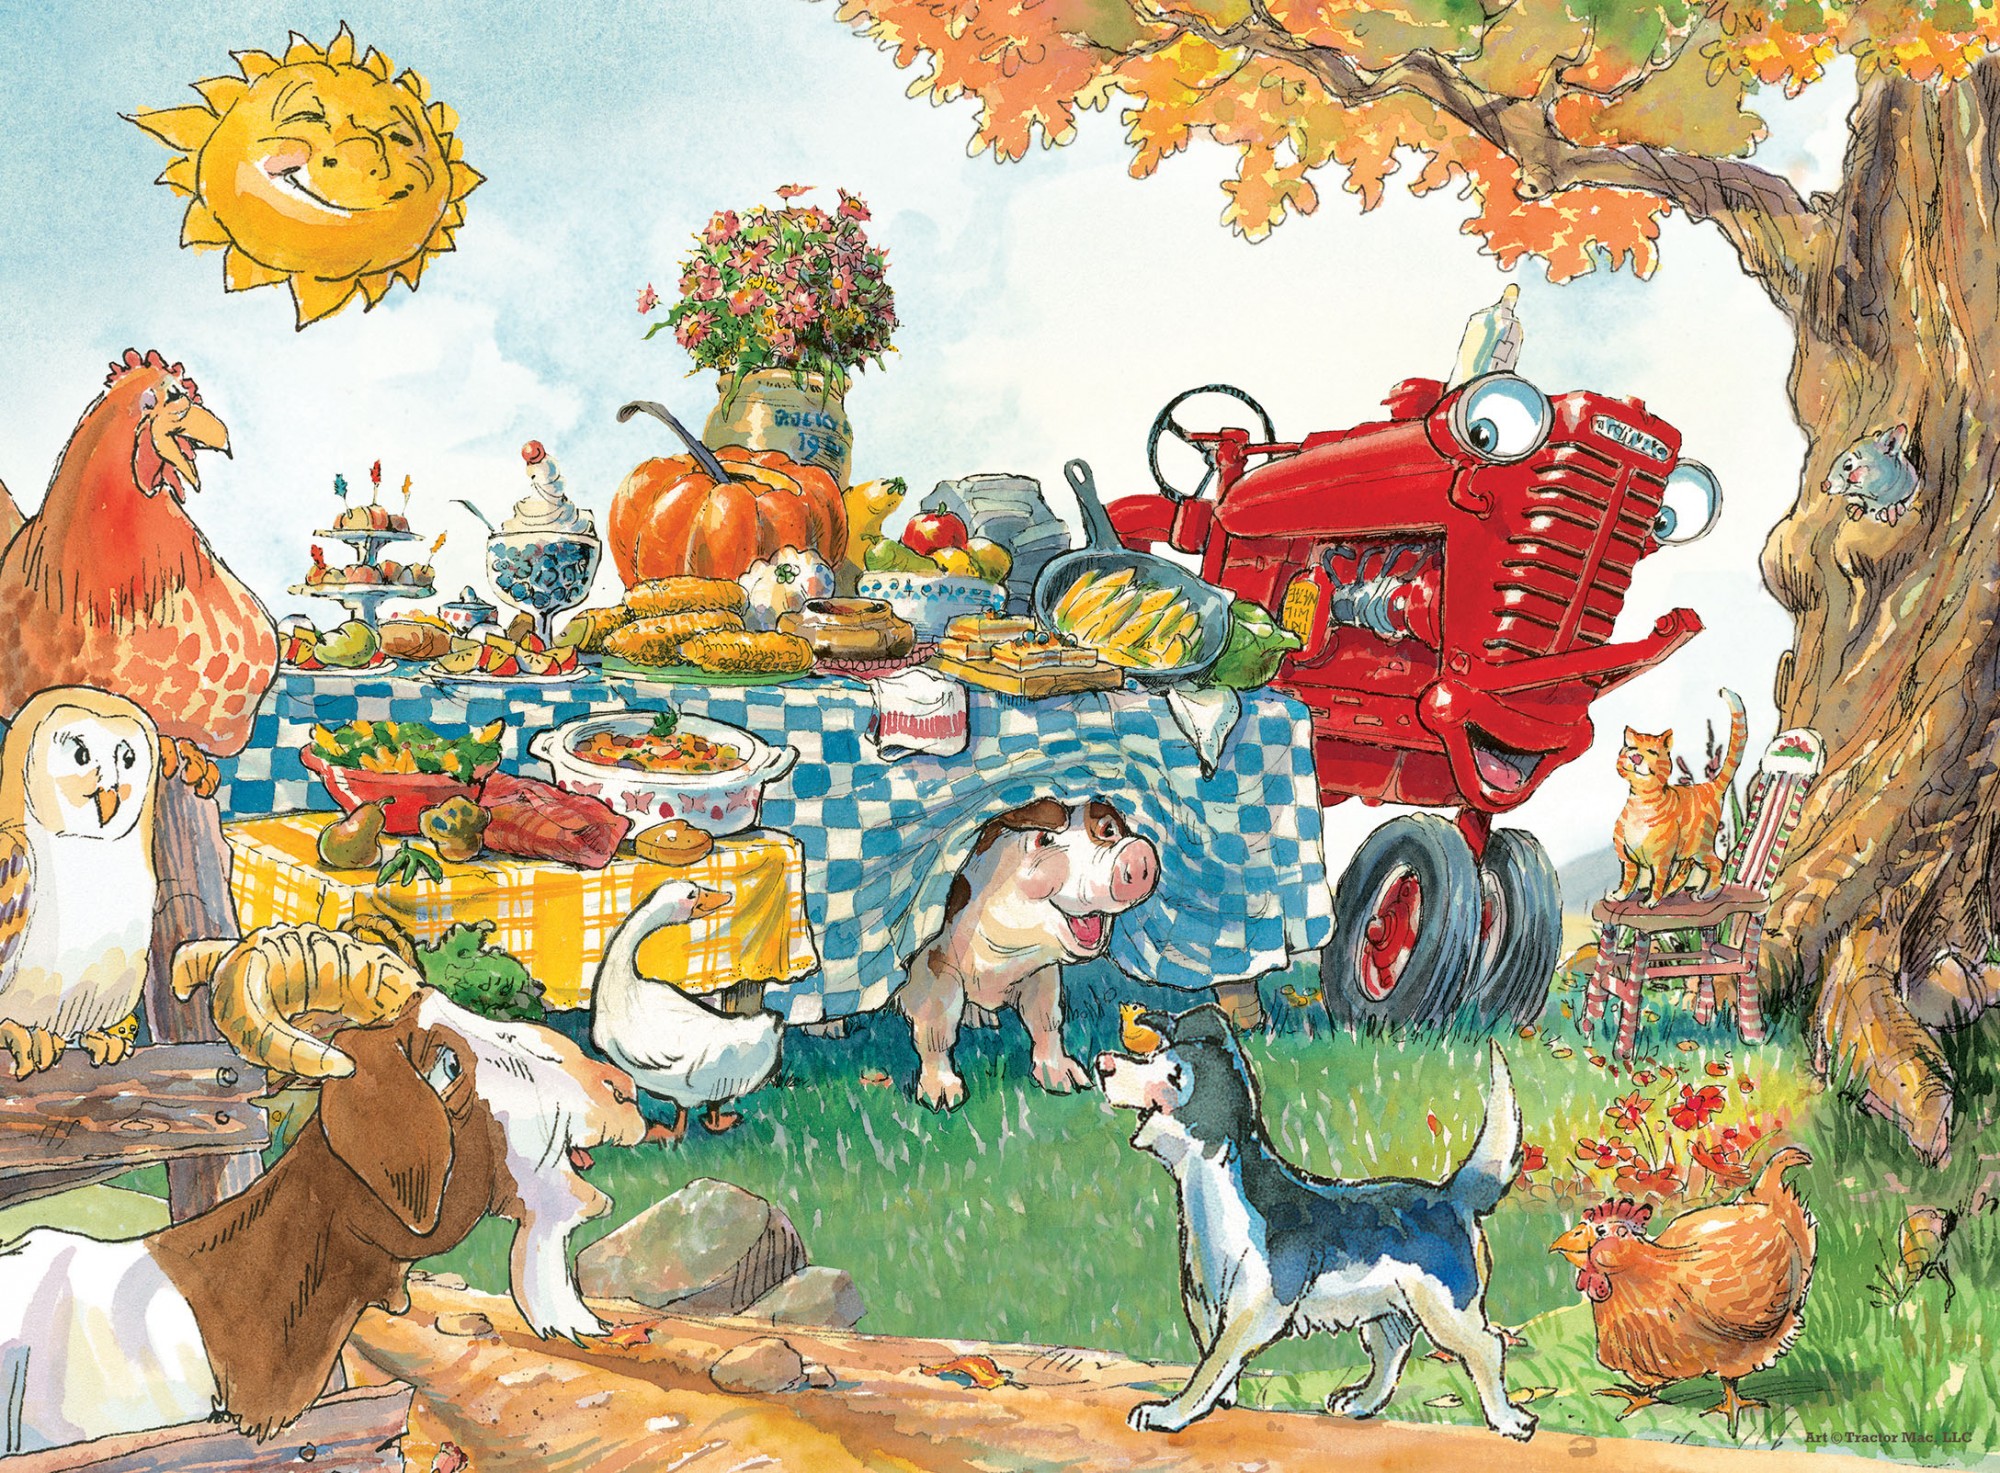 Leanin' Tree/MasterPieces Puzzle - #11822 Tractor Mac: Dinner Time - 60pc Right Fit Jigsaw Puzzle